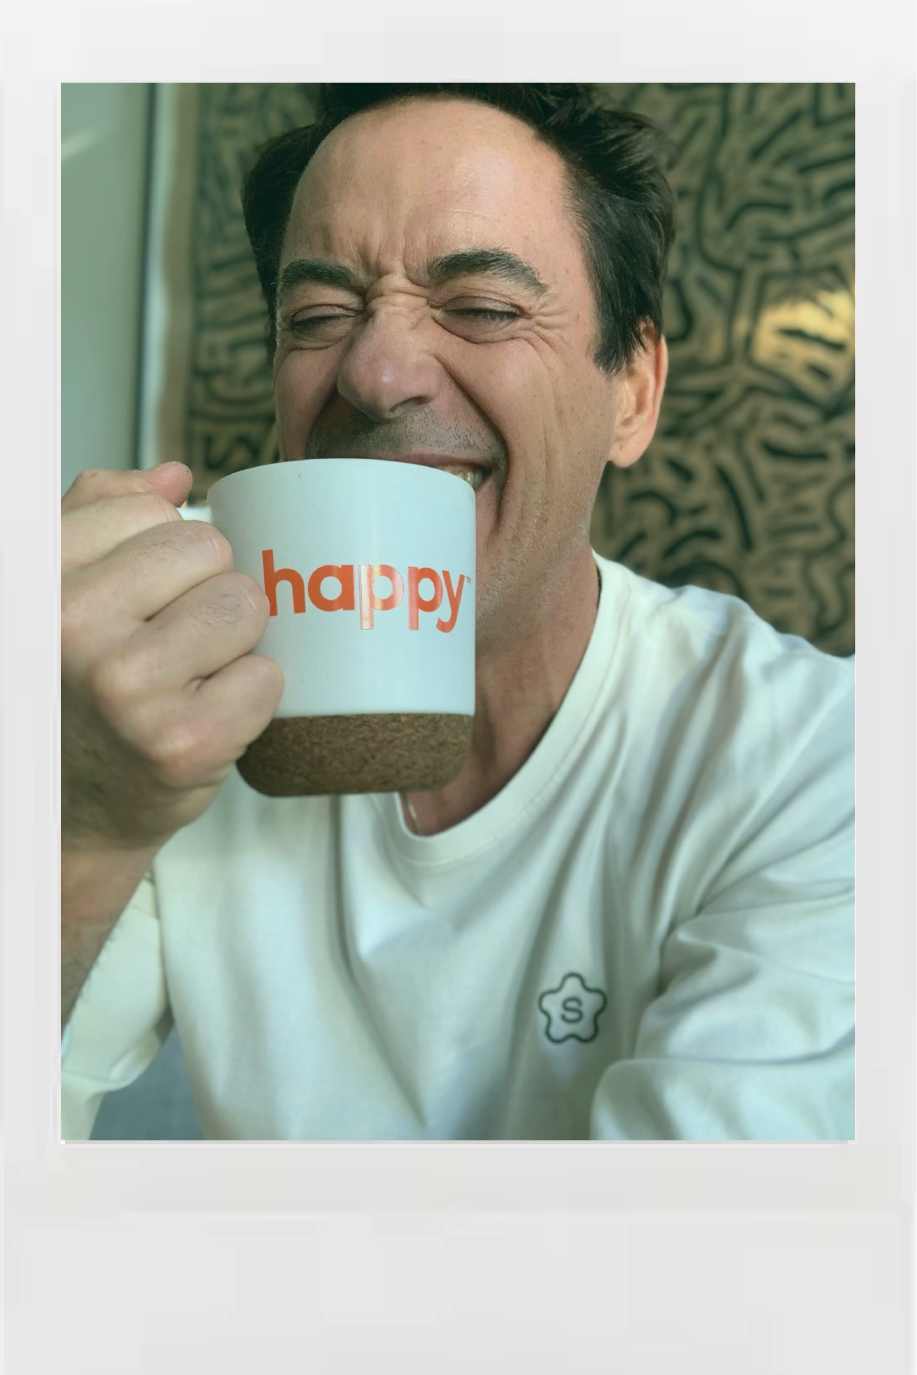 Robert Downey Jr Drinking happy coffee and laughing